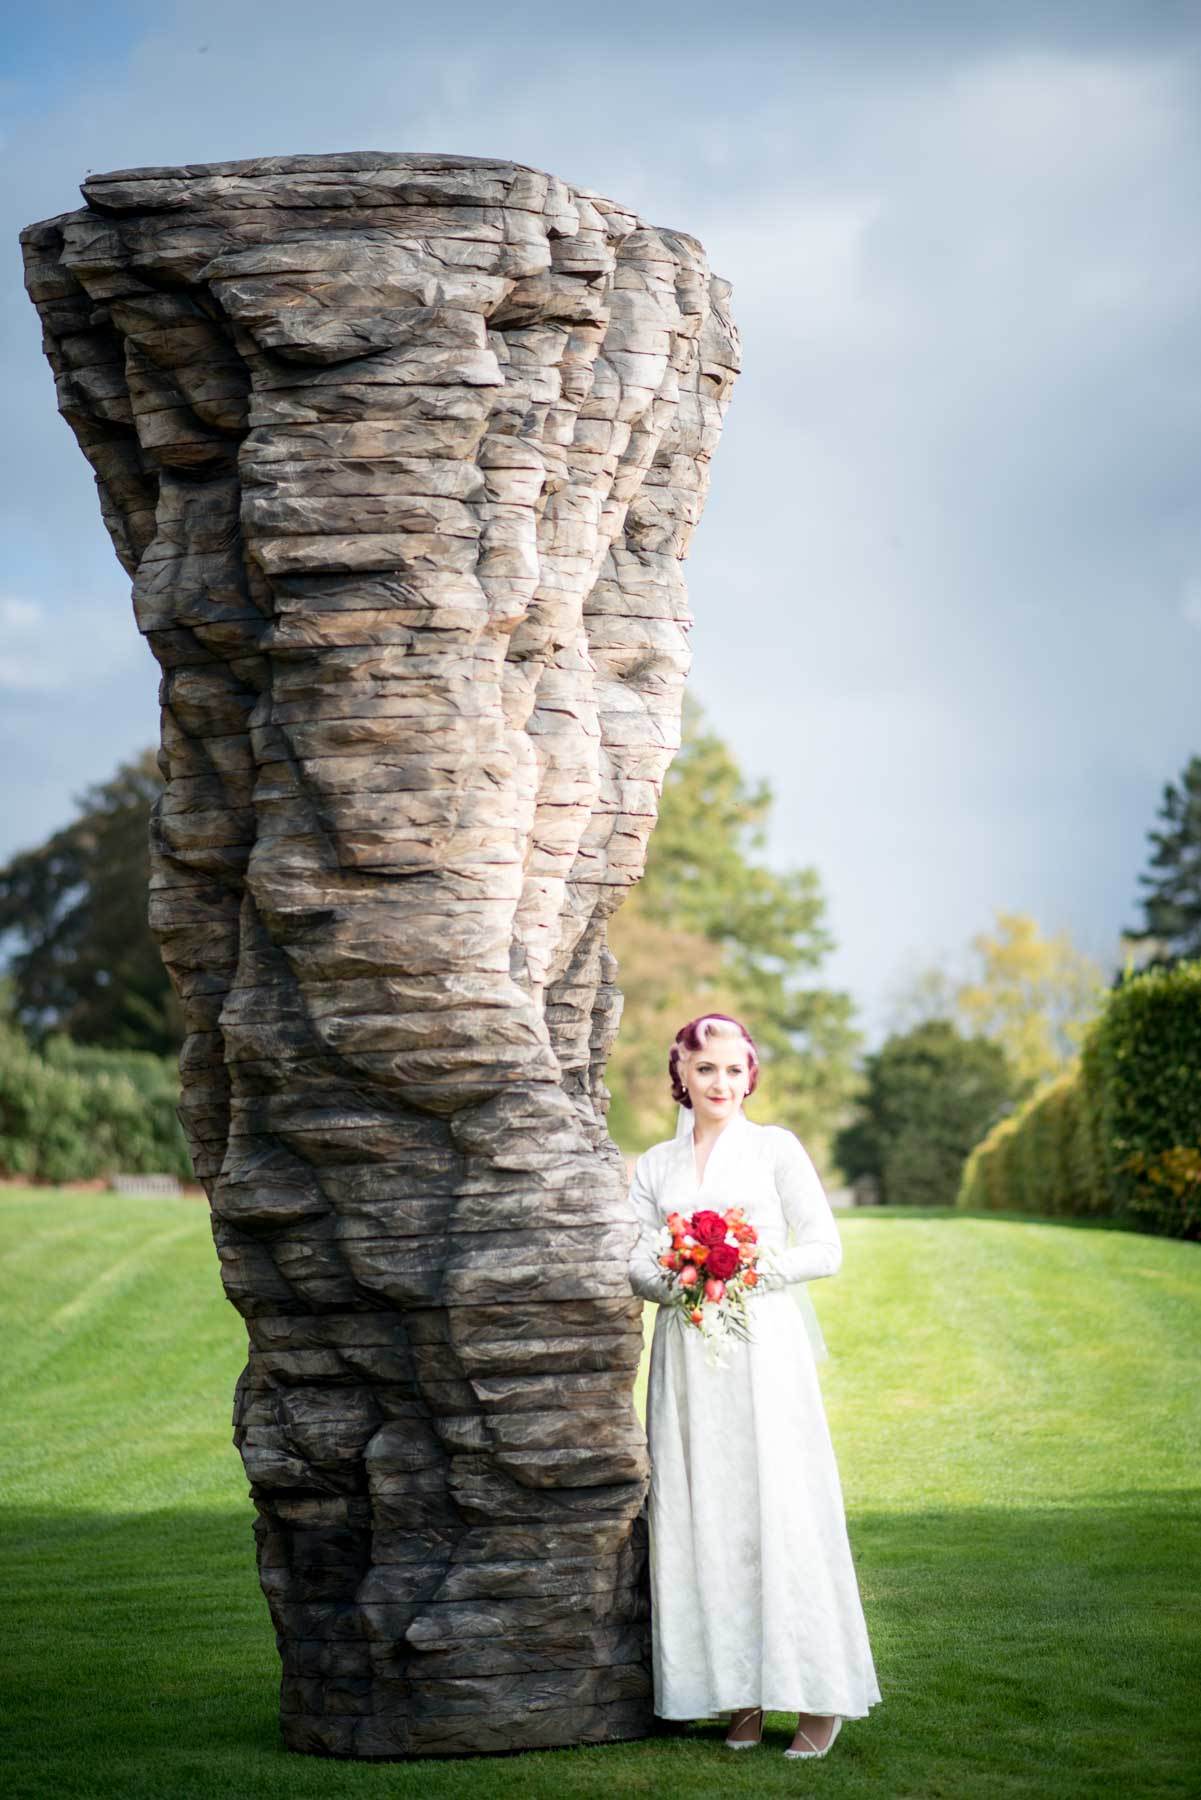 A Yorkshire vintage wedding with a 1950s dress photographed by Tim Simpson